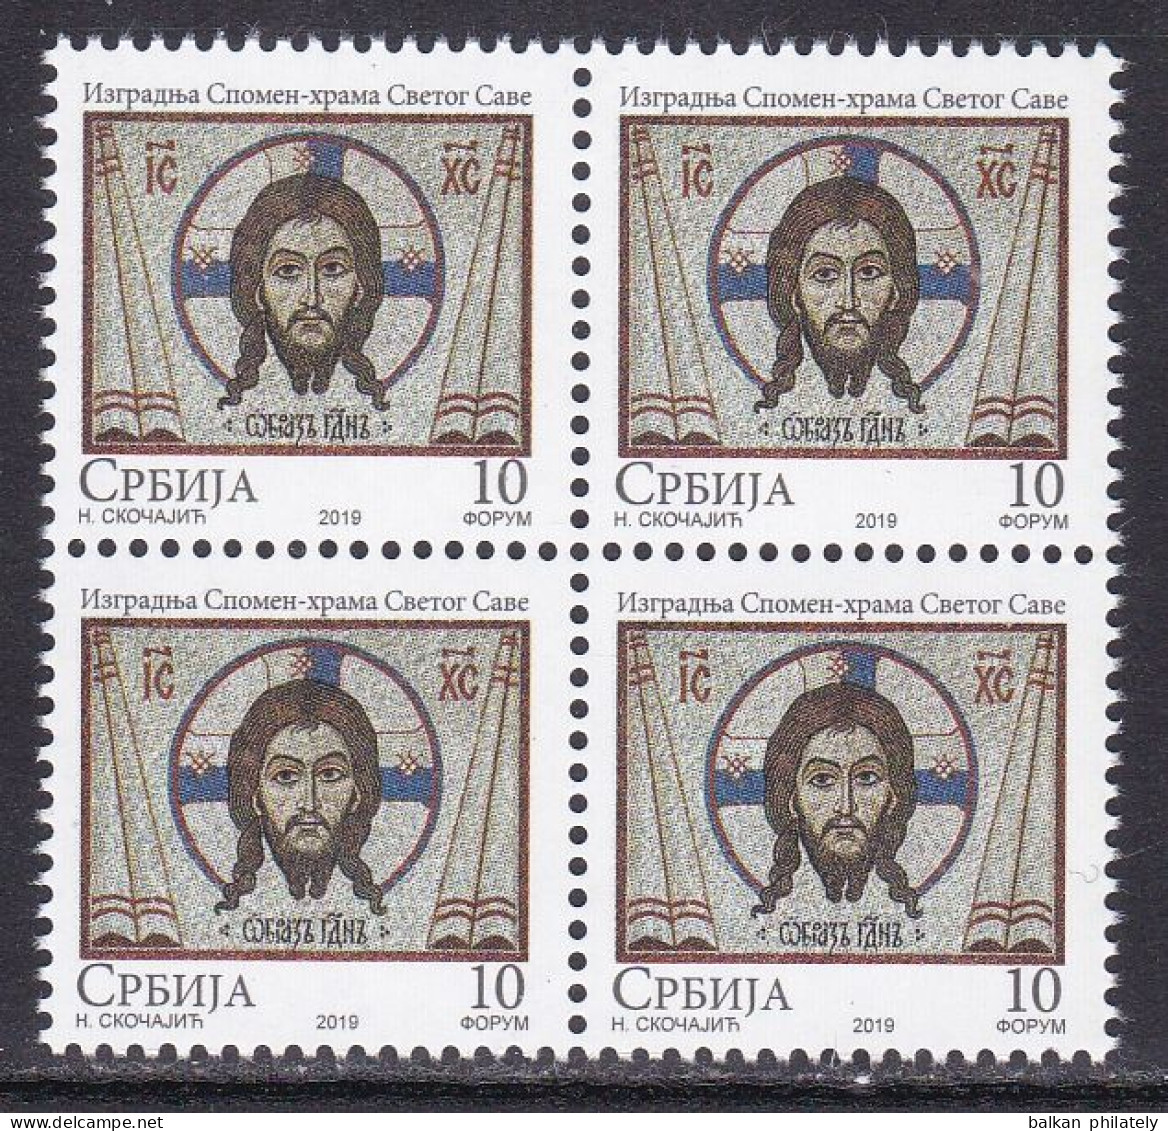 Serbia 2019 For The Temple Of Saint Sava Religions Christianity Jesus Christ Church Tax Charity Surcharge Stamp MNH - Serbie